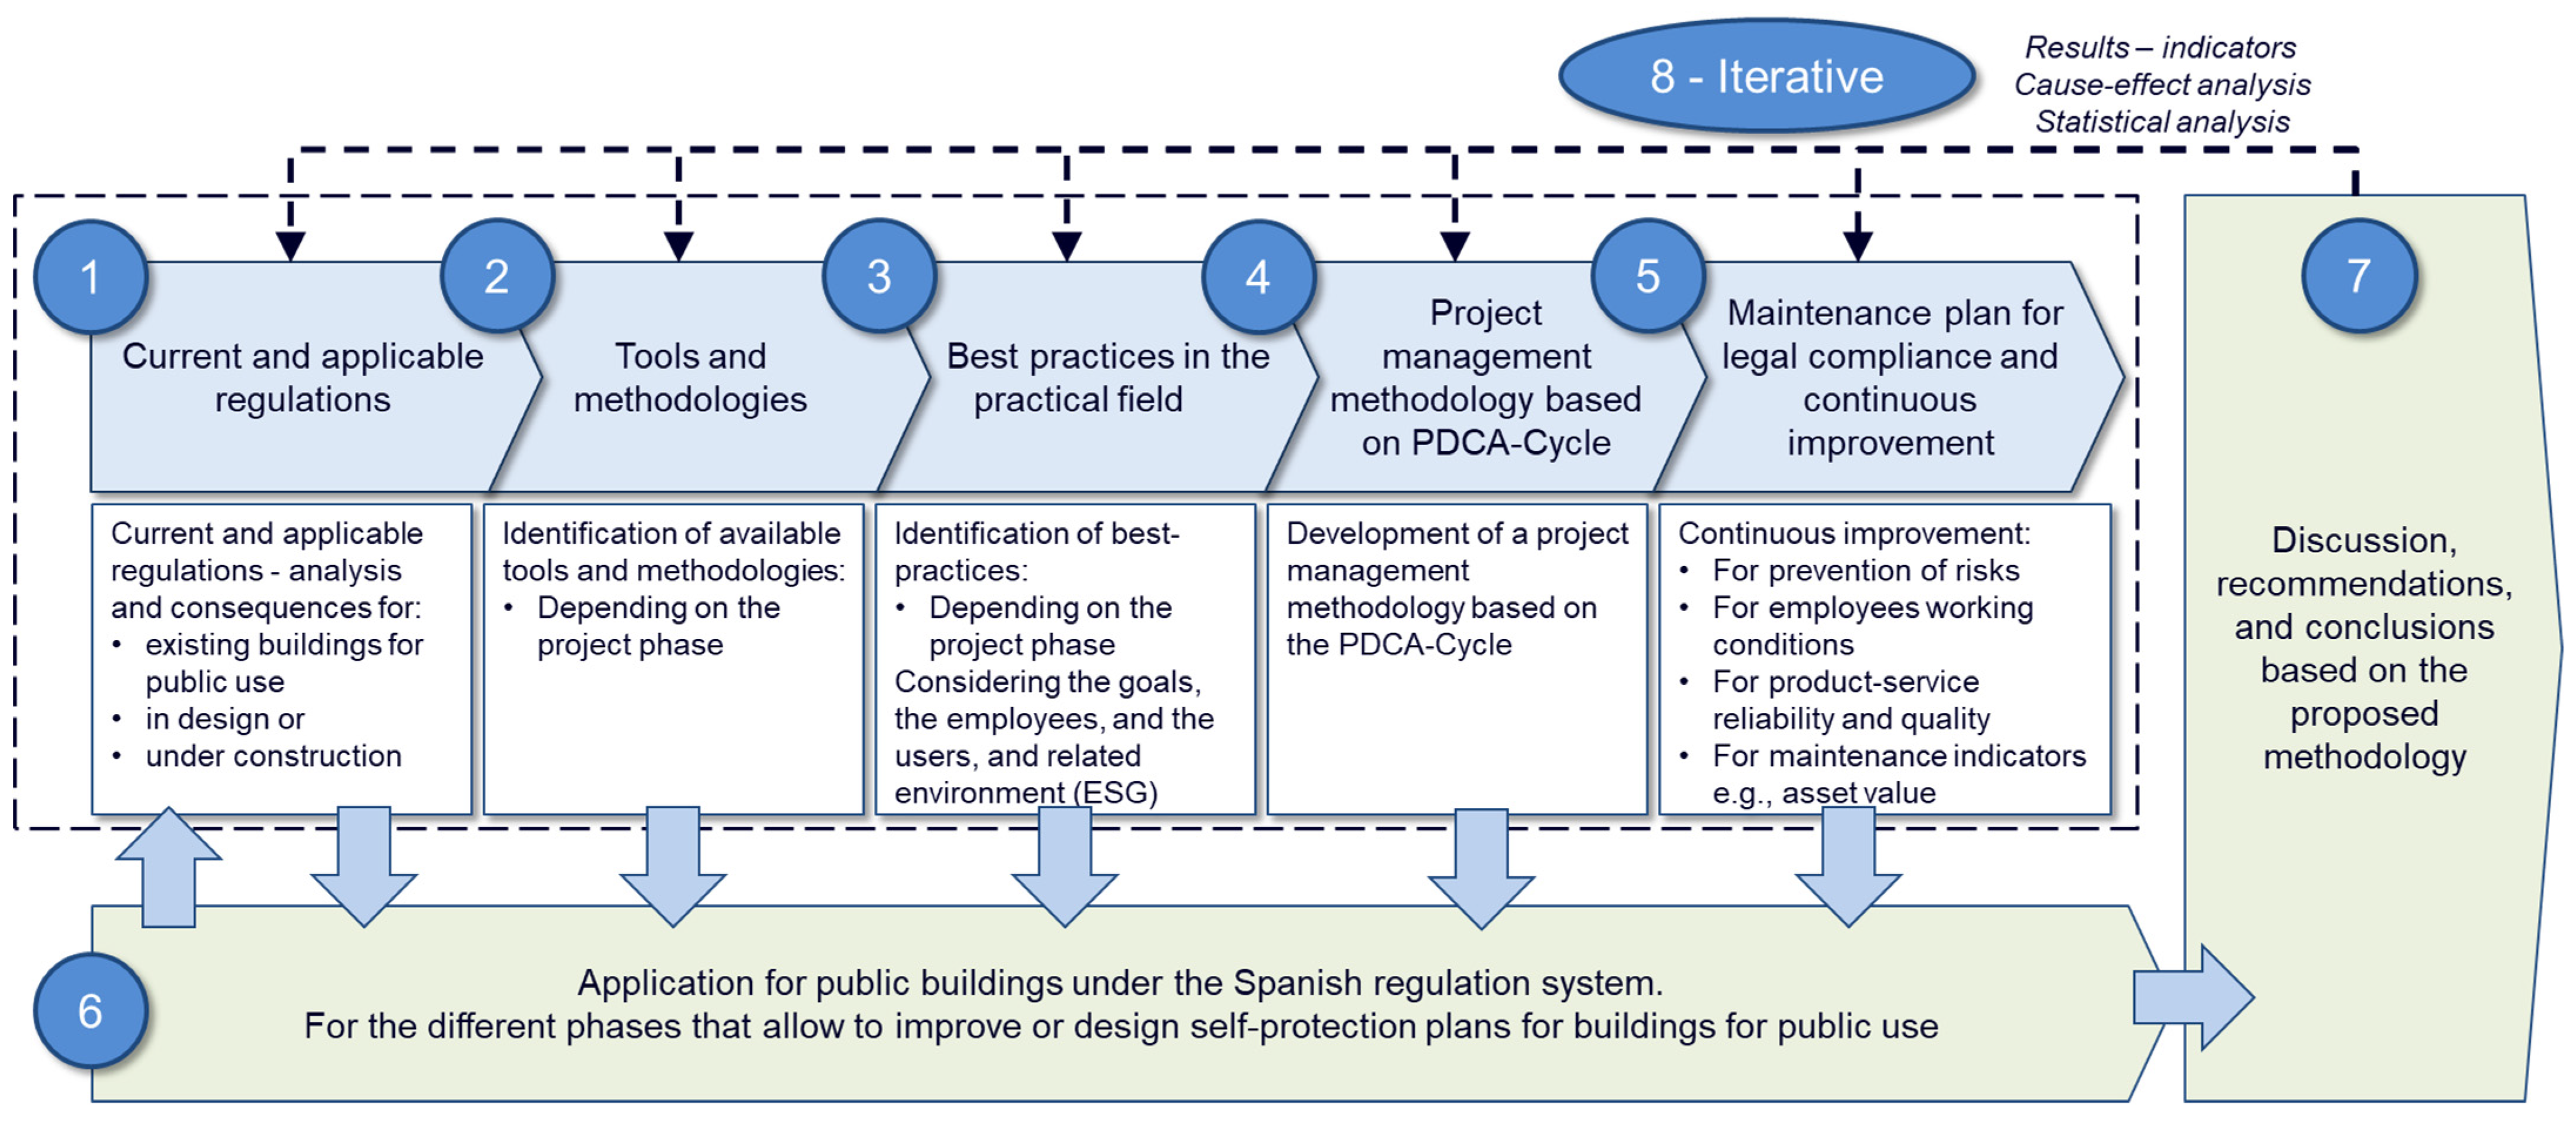 Applied Sciences | Free Full-Text | Project Design and Management of  Optimized Self-Protection Plans: A Case Study for Spanish Public Buildings